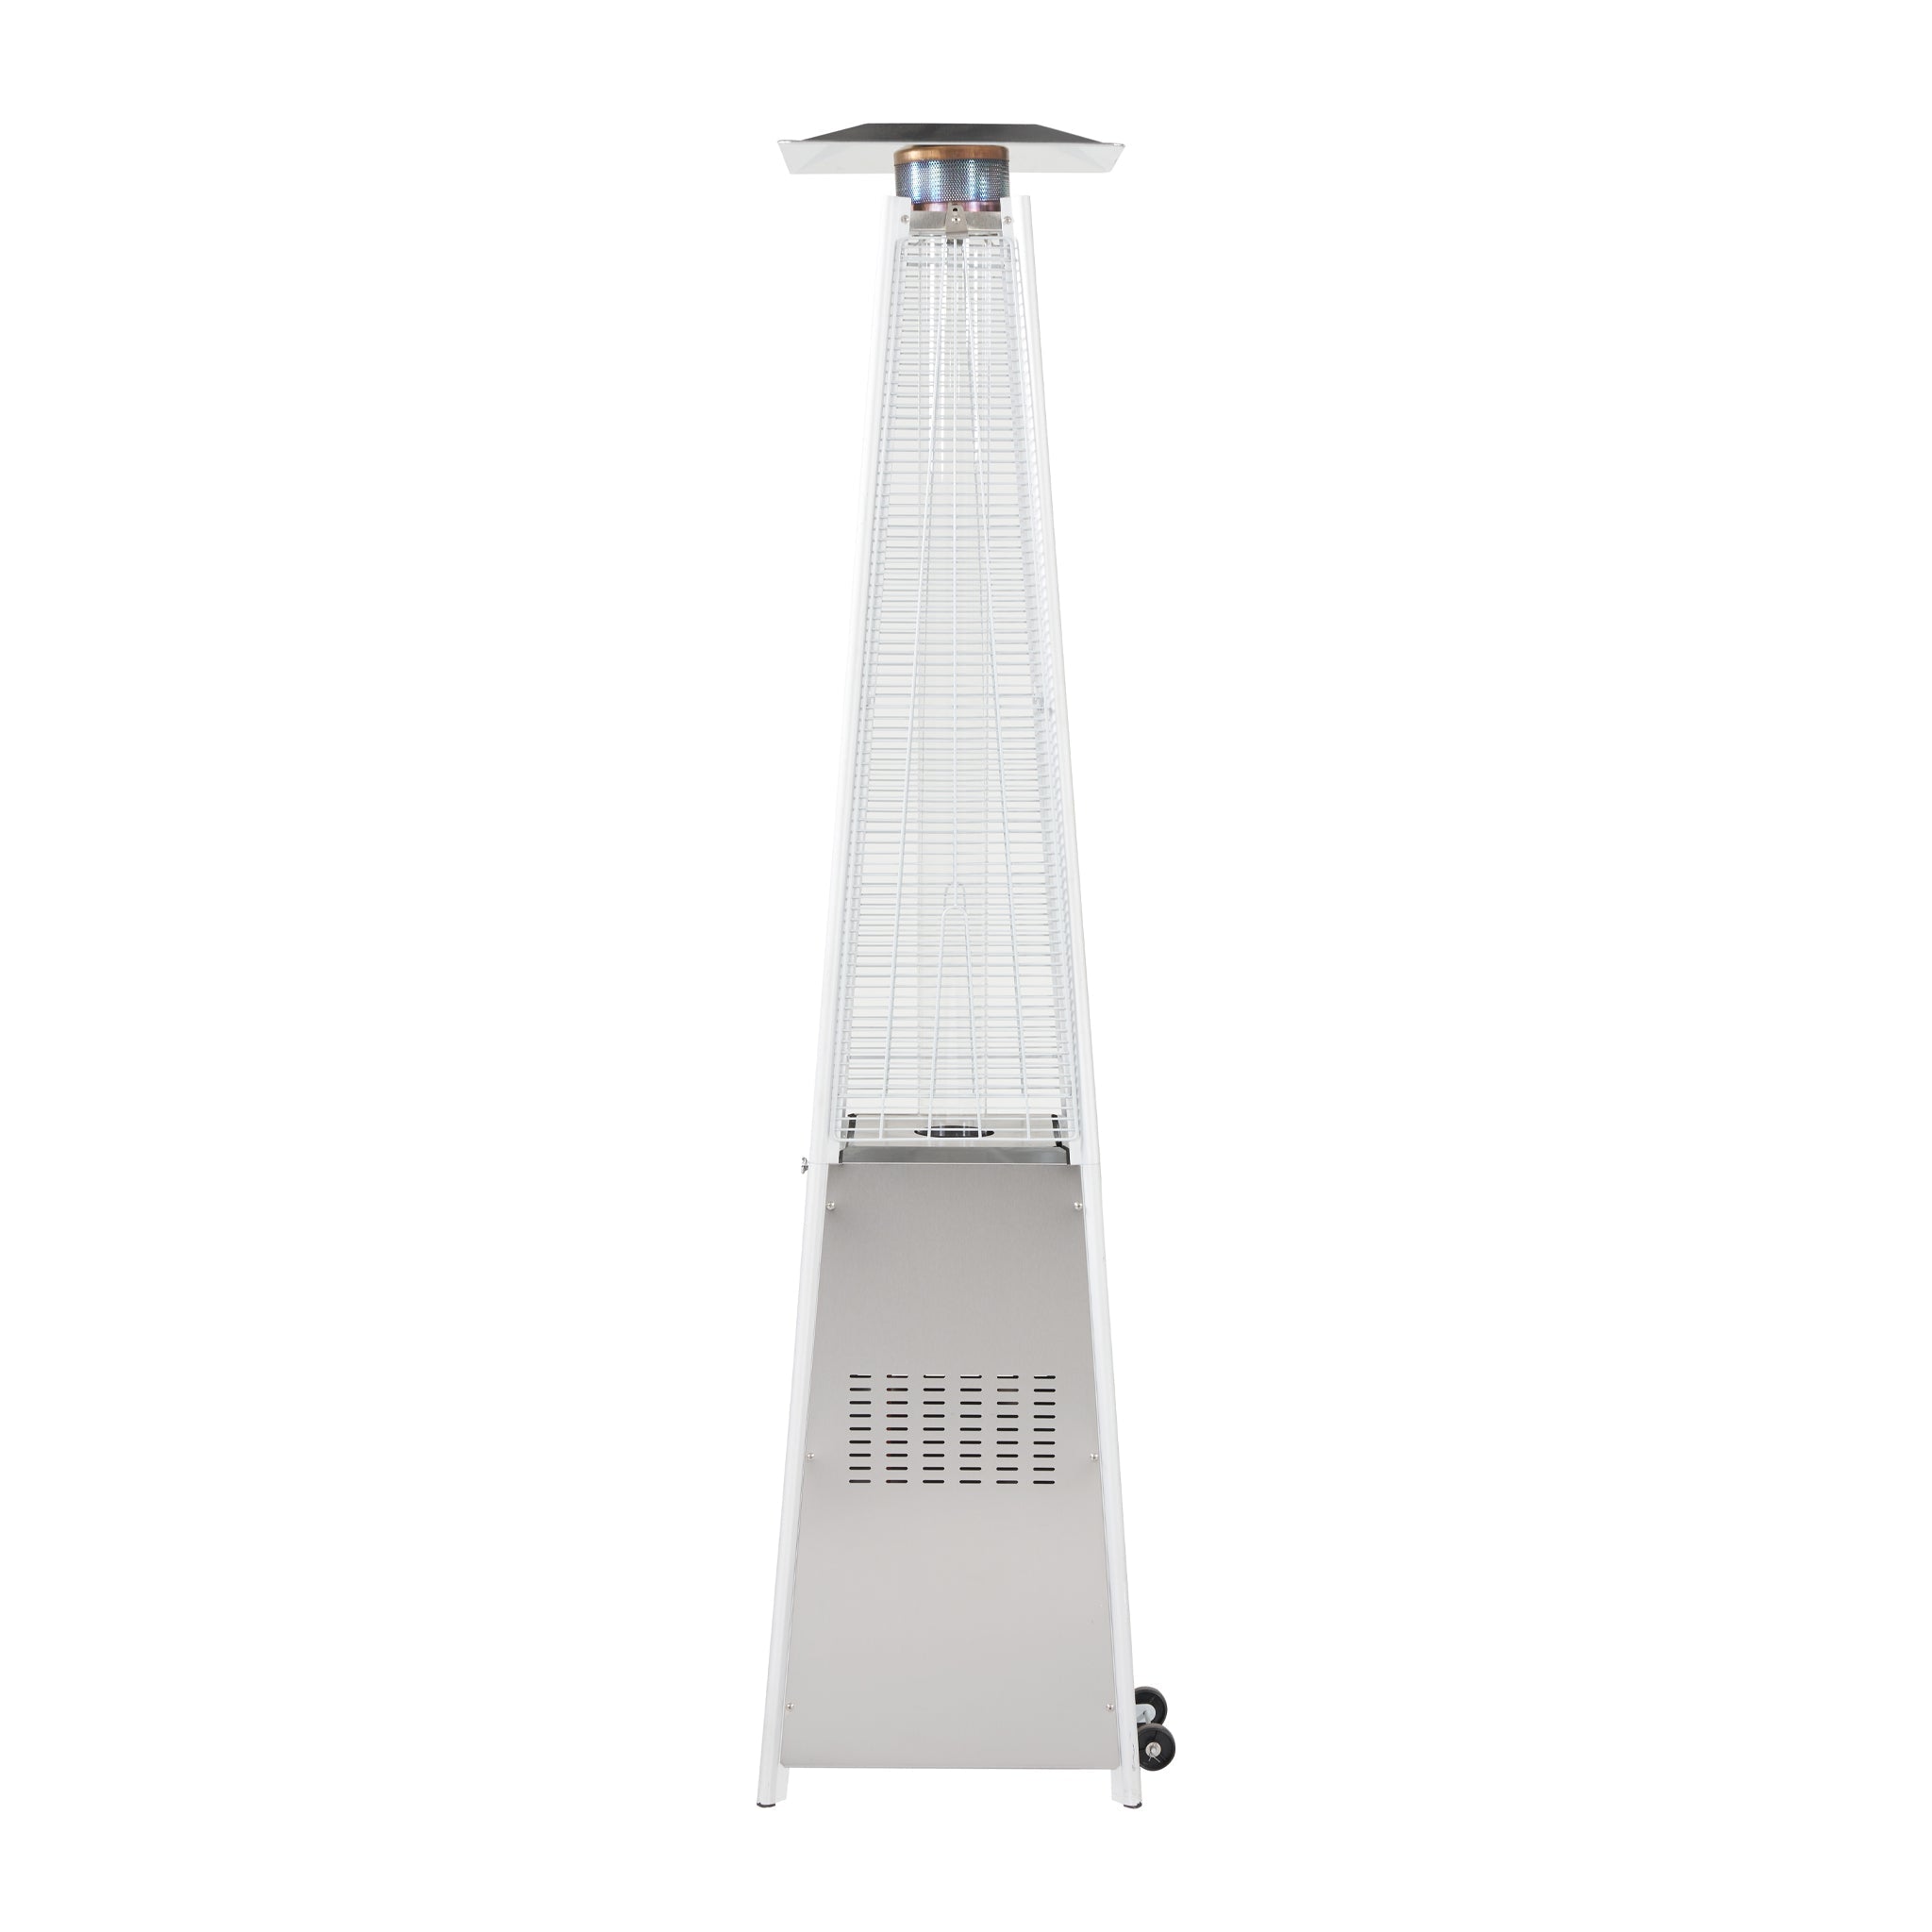 Quadrilateral Patio Heater in Stainless Steel